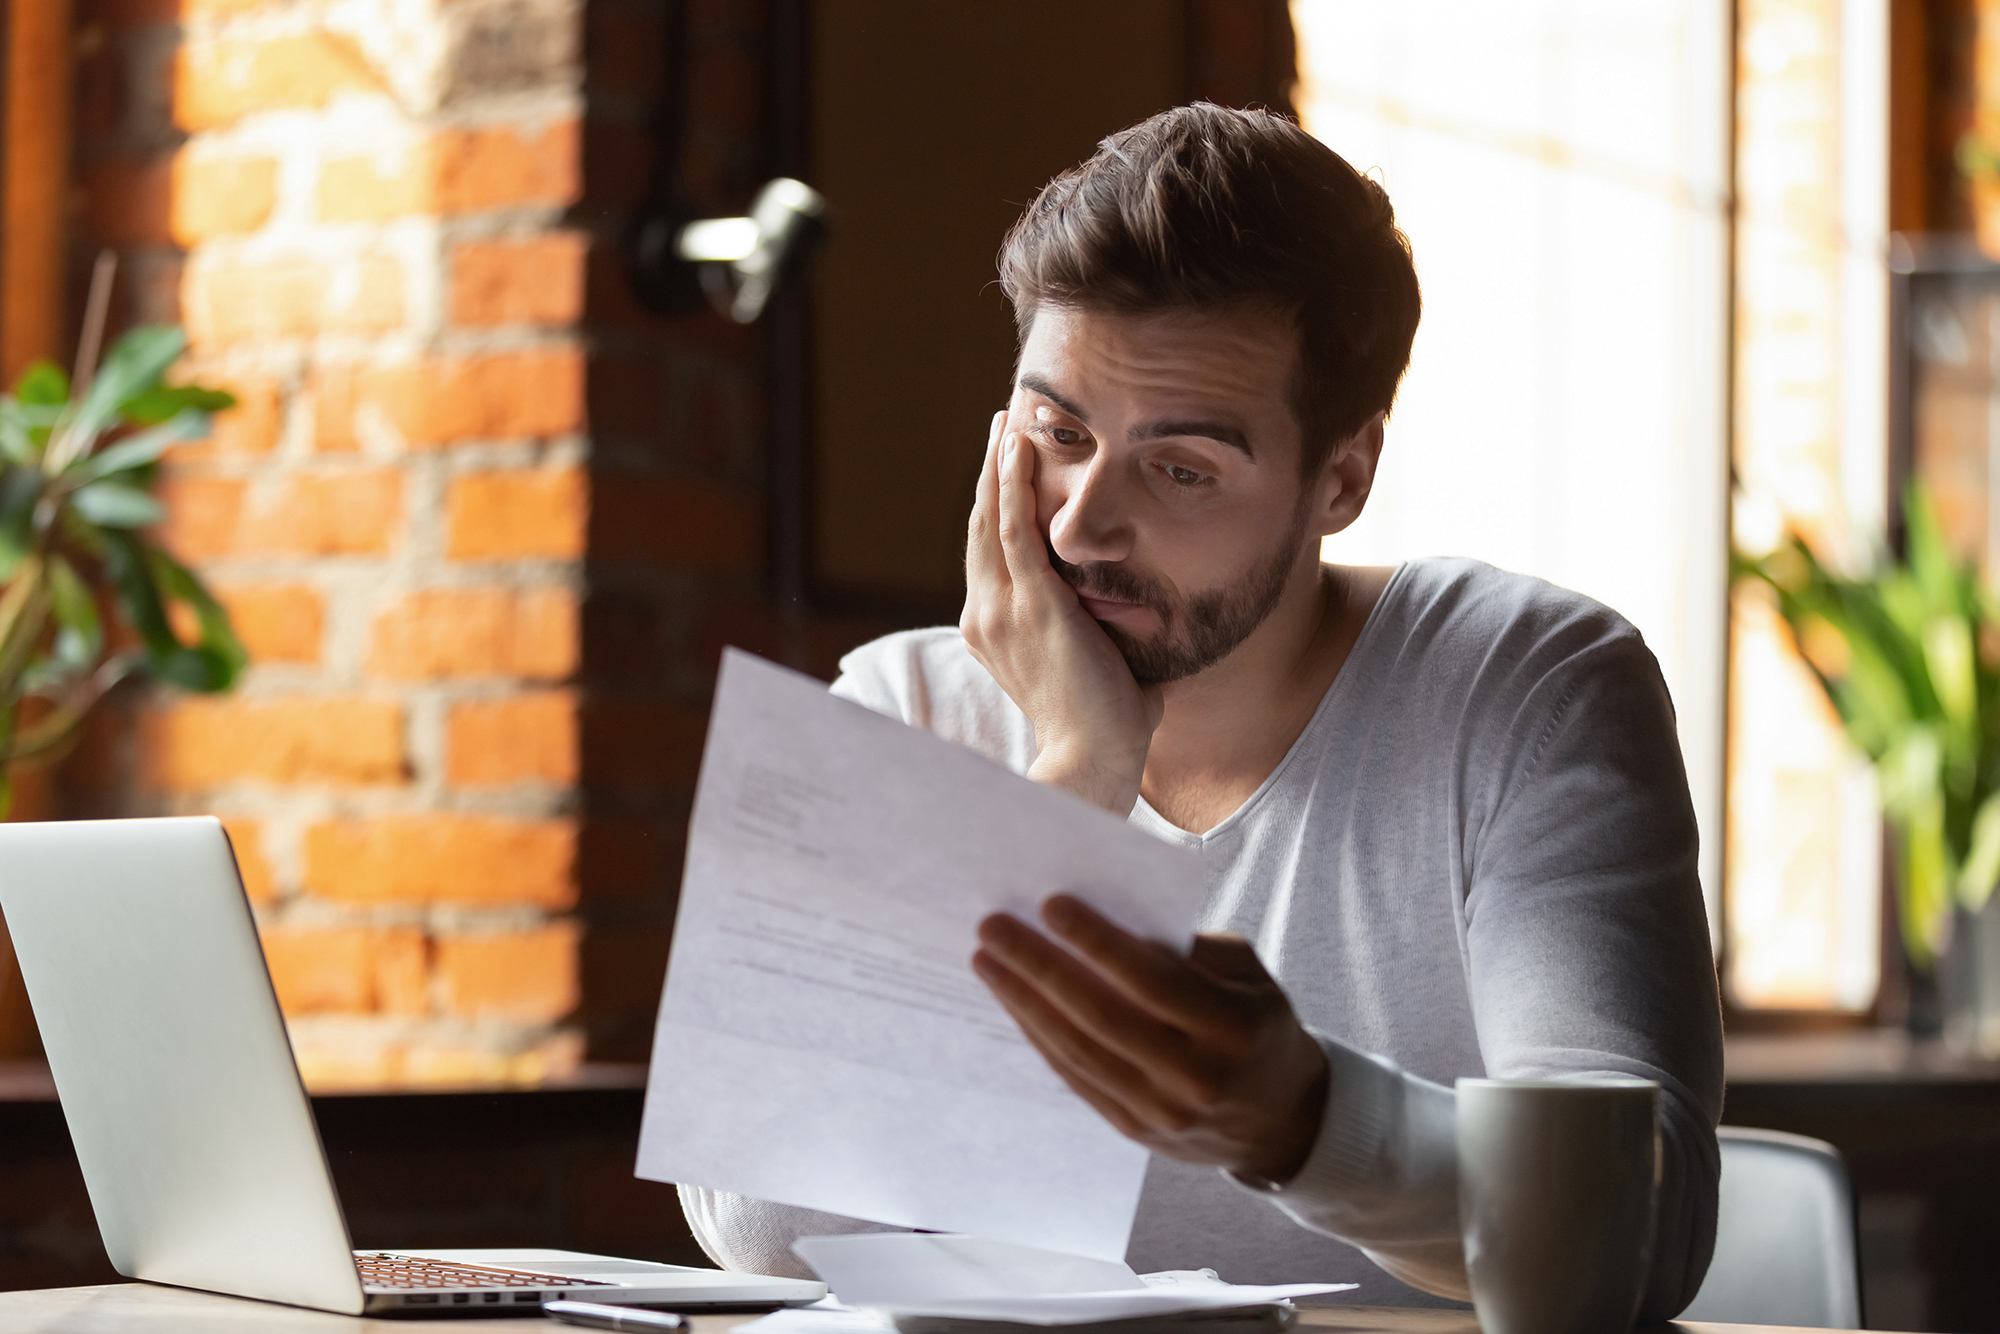 Disappointed man with a letter. (Image: Shutterstock)